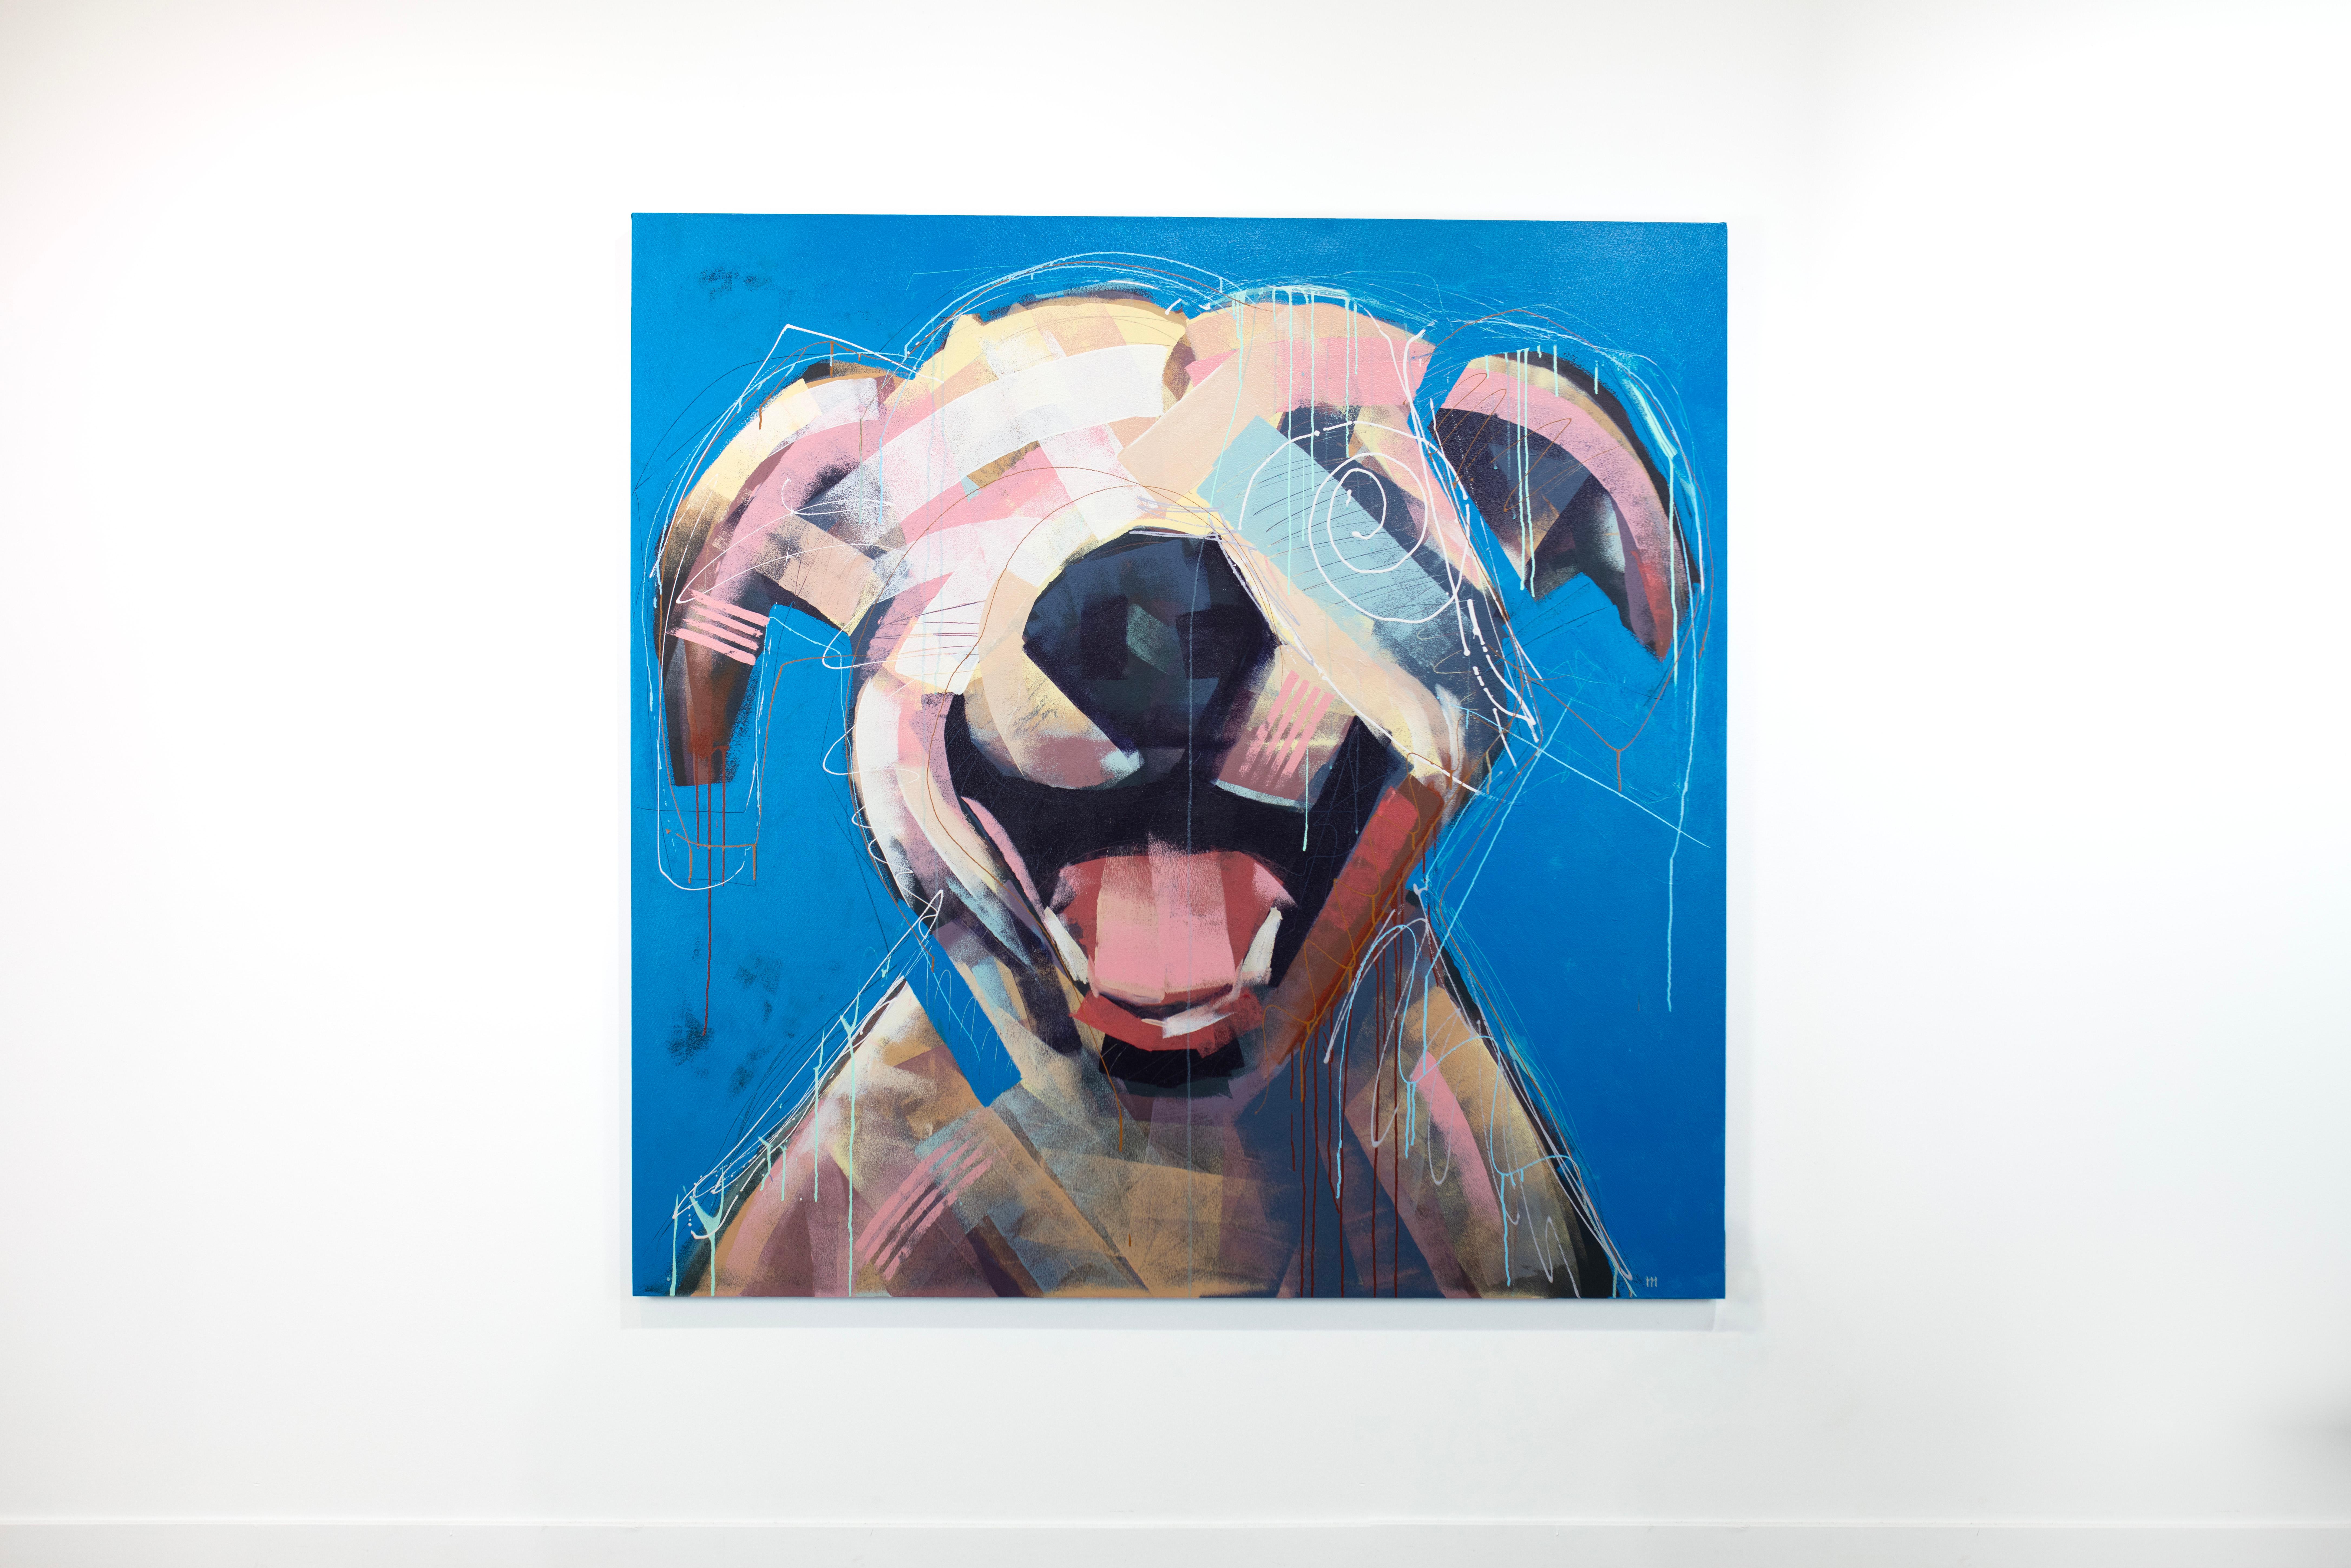 Russell Miyaki Animal Painting - "A Good Day" Abstracted Dog Painting